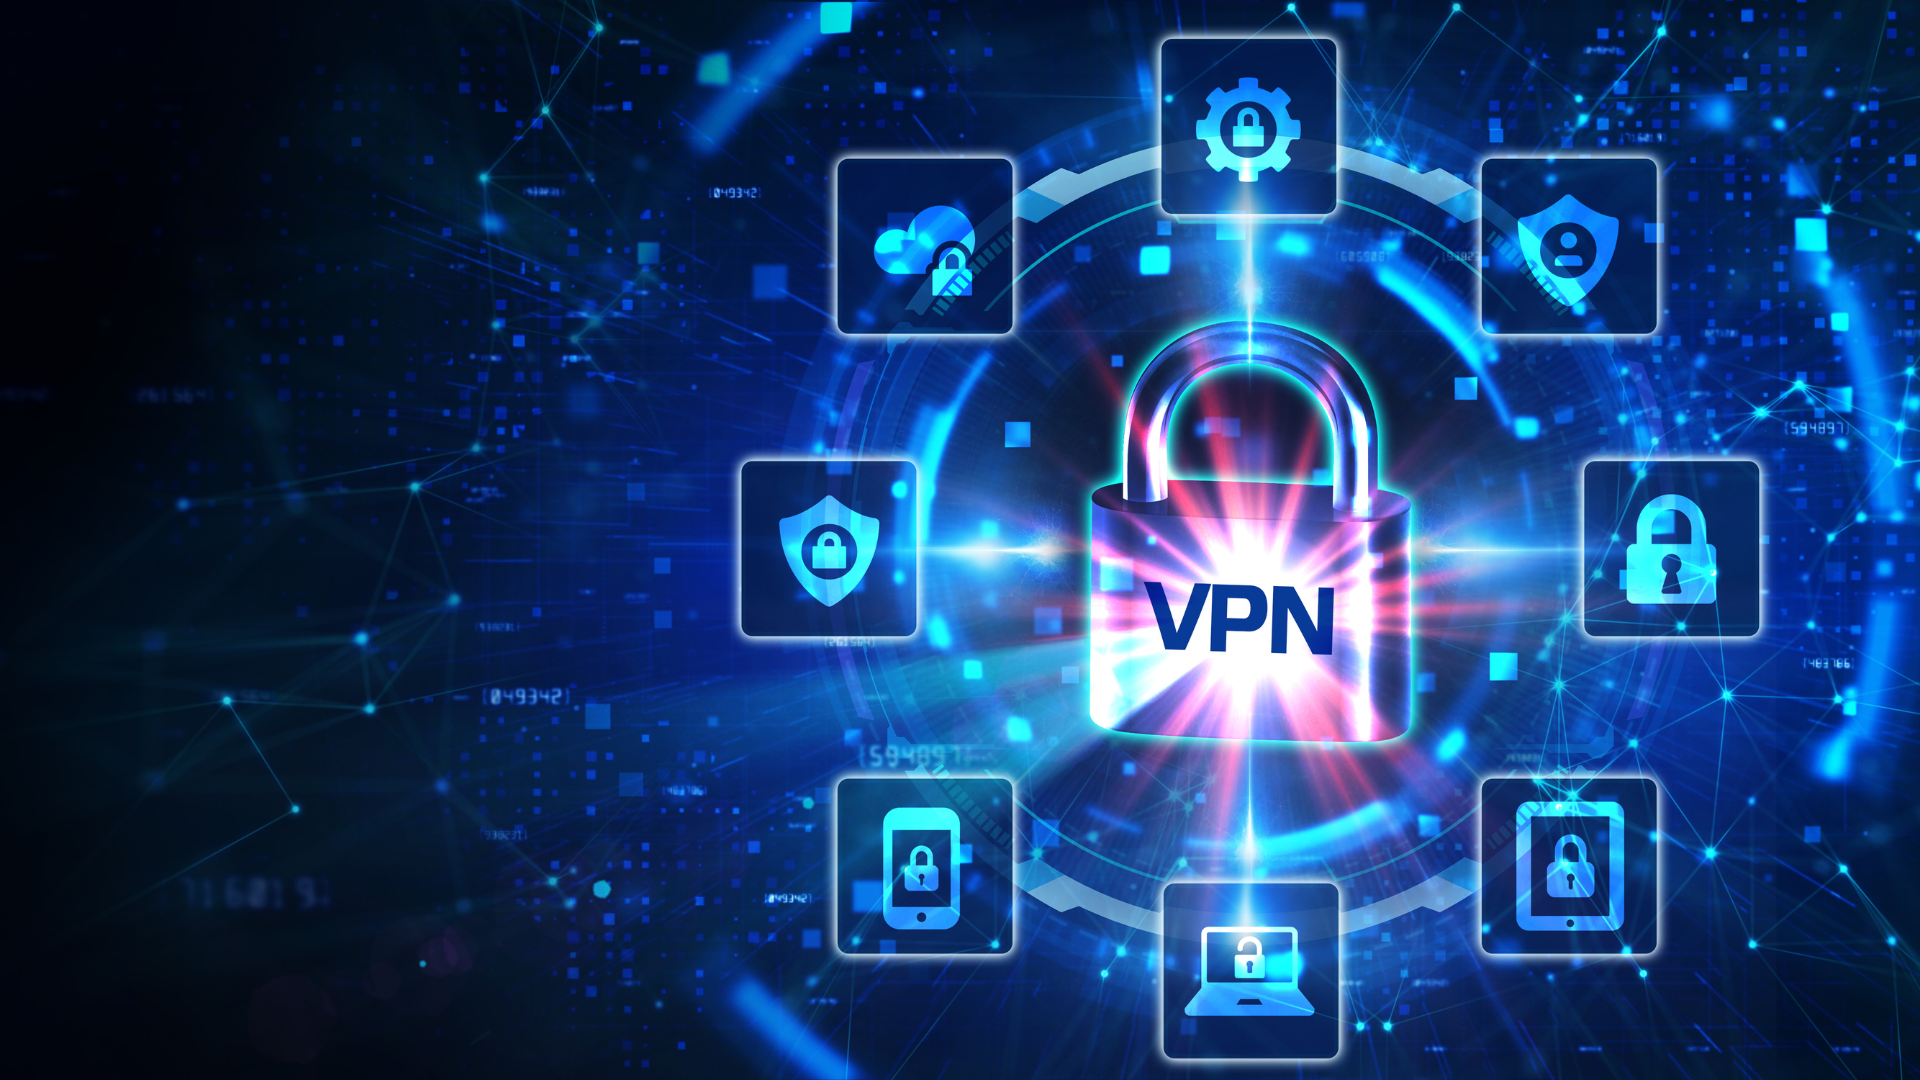 What’s The Deal With VPN Use? Is It Safe?